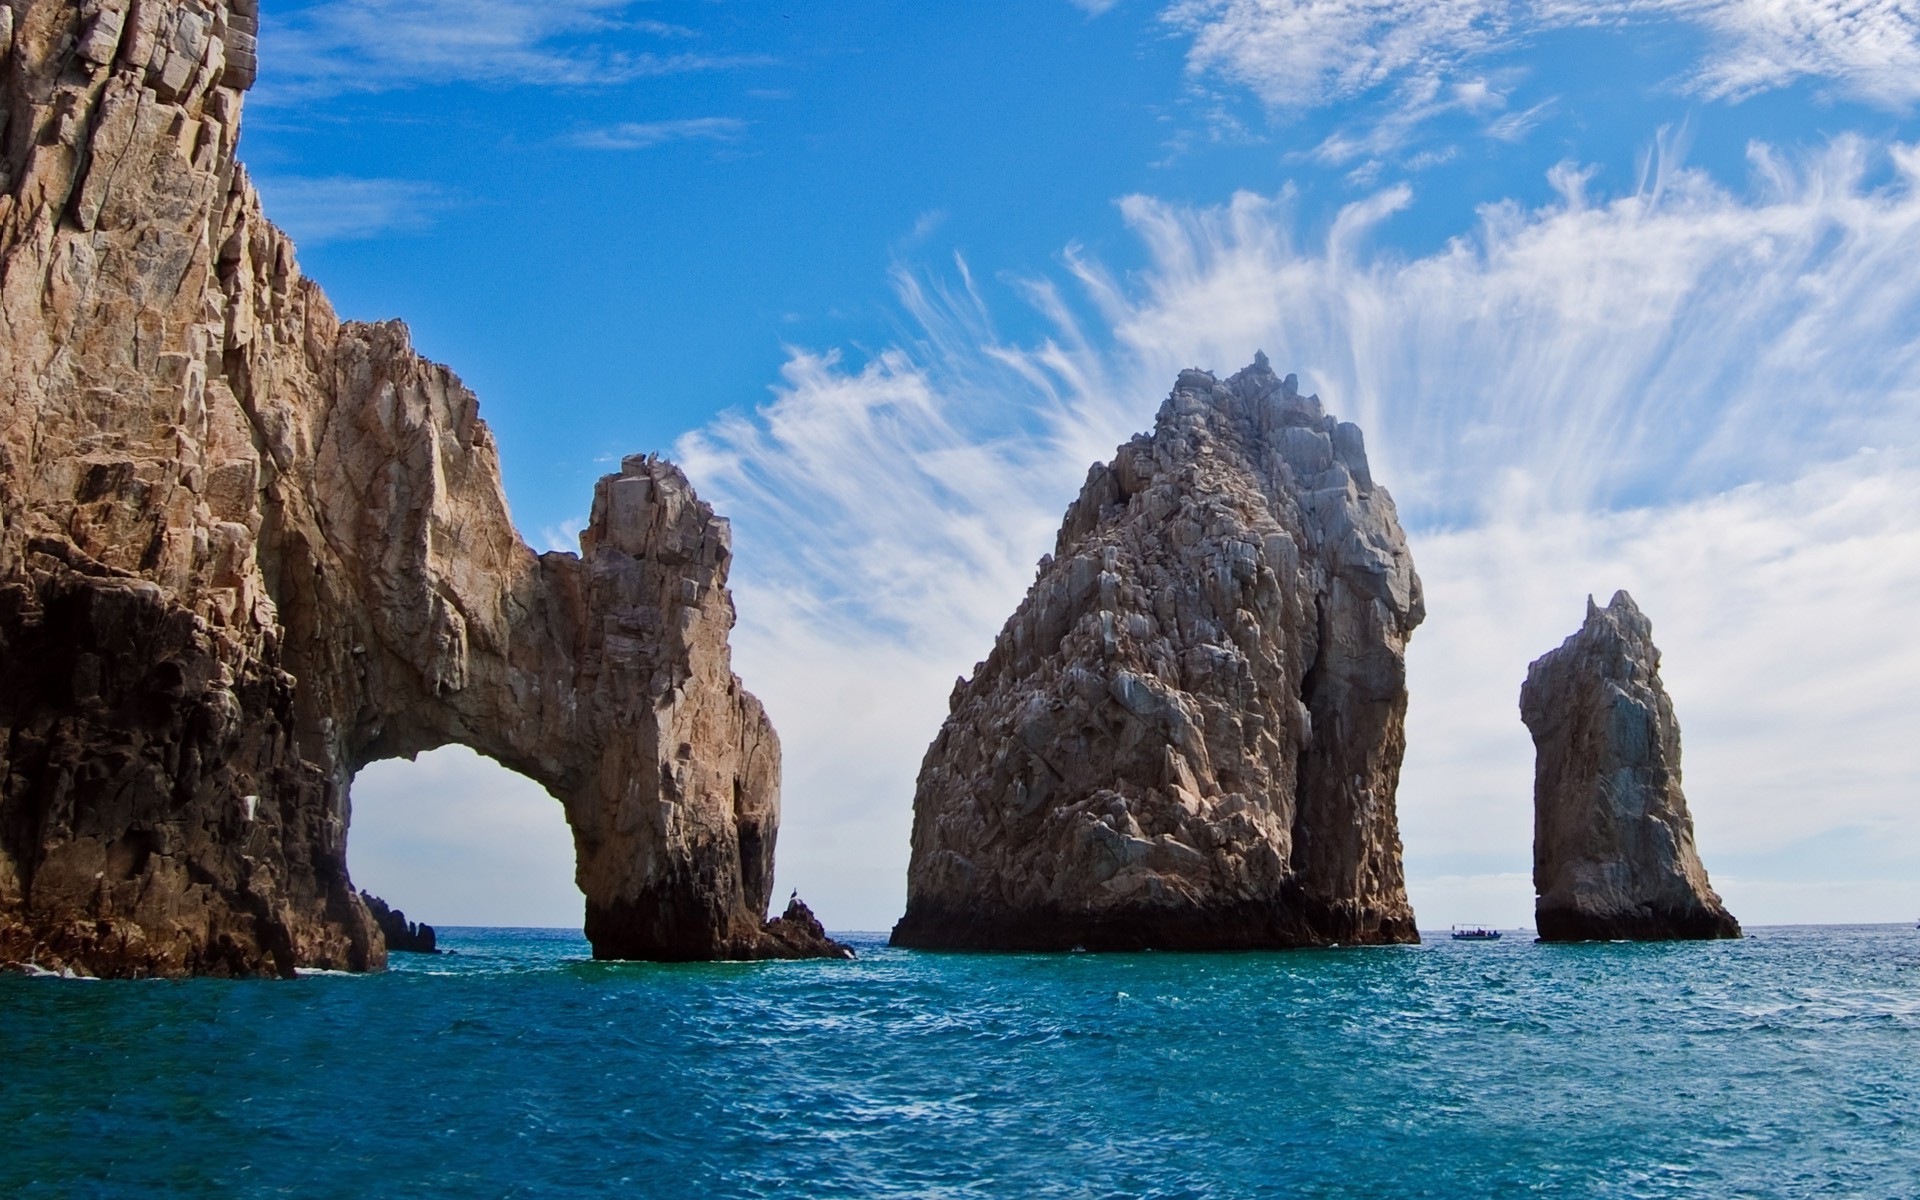 sea, Rock, Cliff, Island, Beach, Mexico, Clouds, Nature, Water, Landscape  Wallpapers HD / Desktop and Mobile Backgrounds